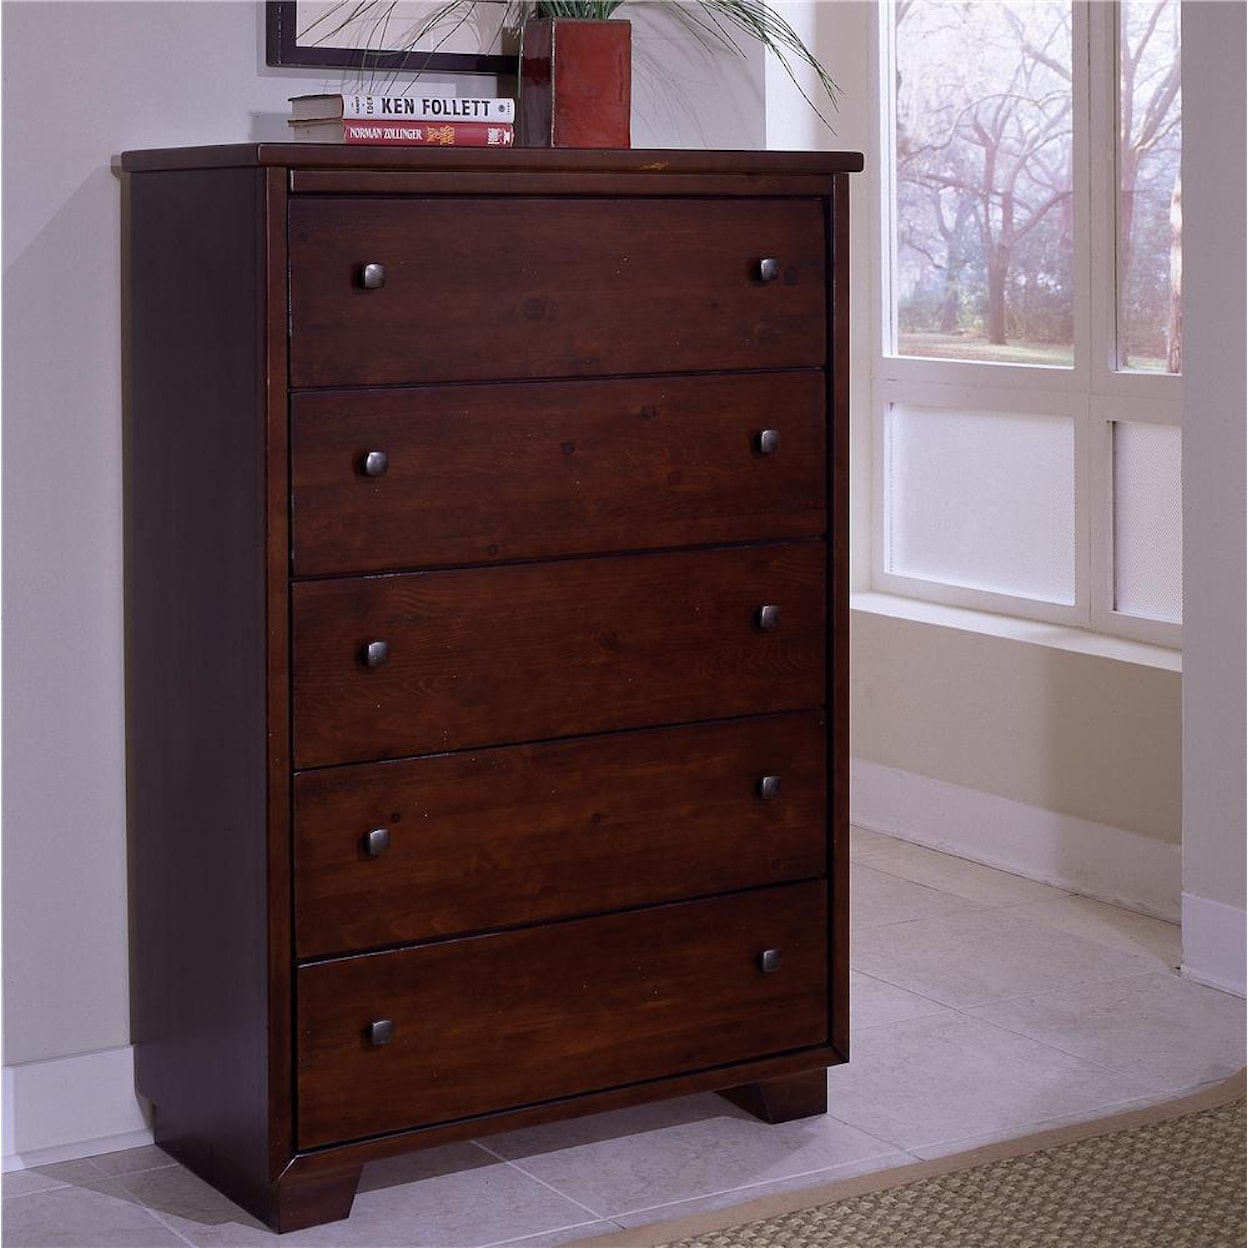 Progressive Furniture Diego Chest of Drawers